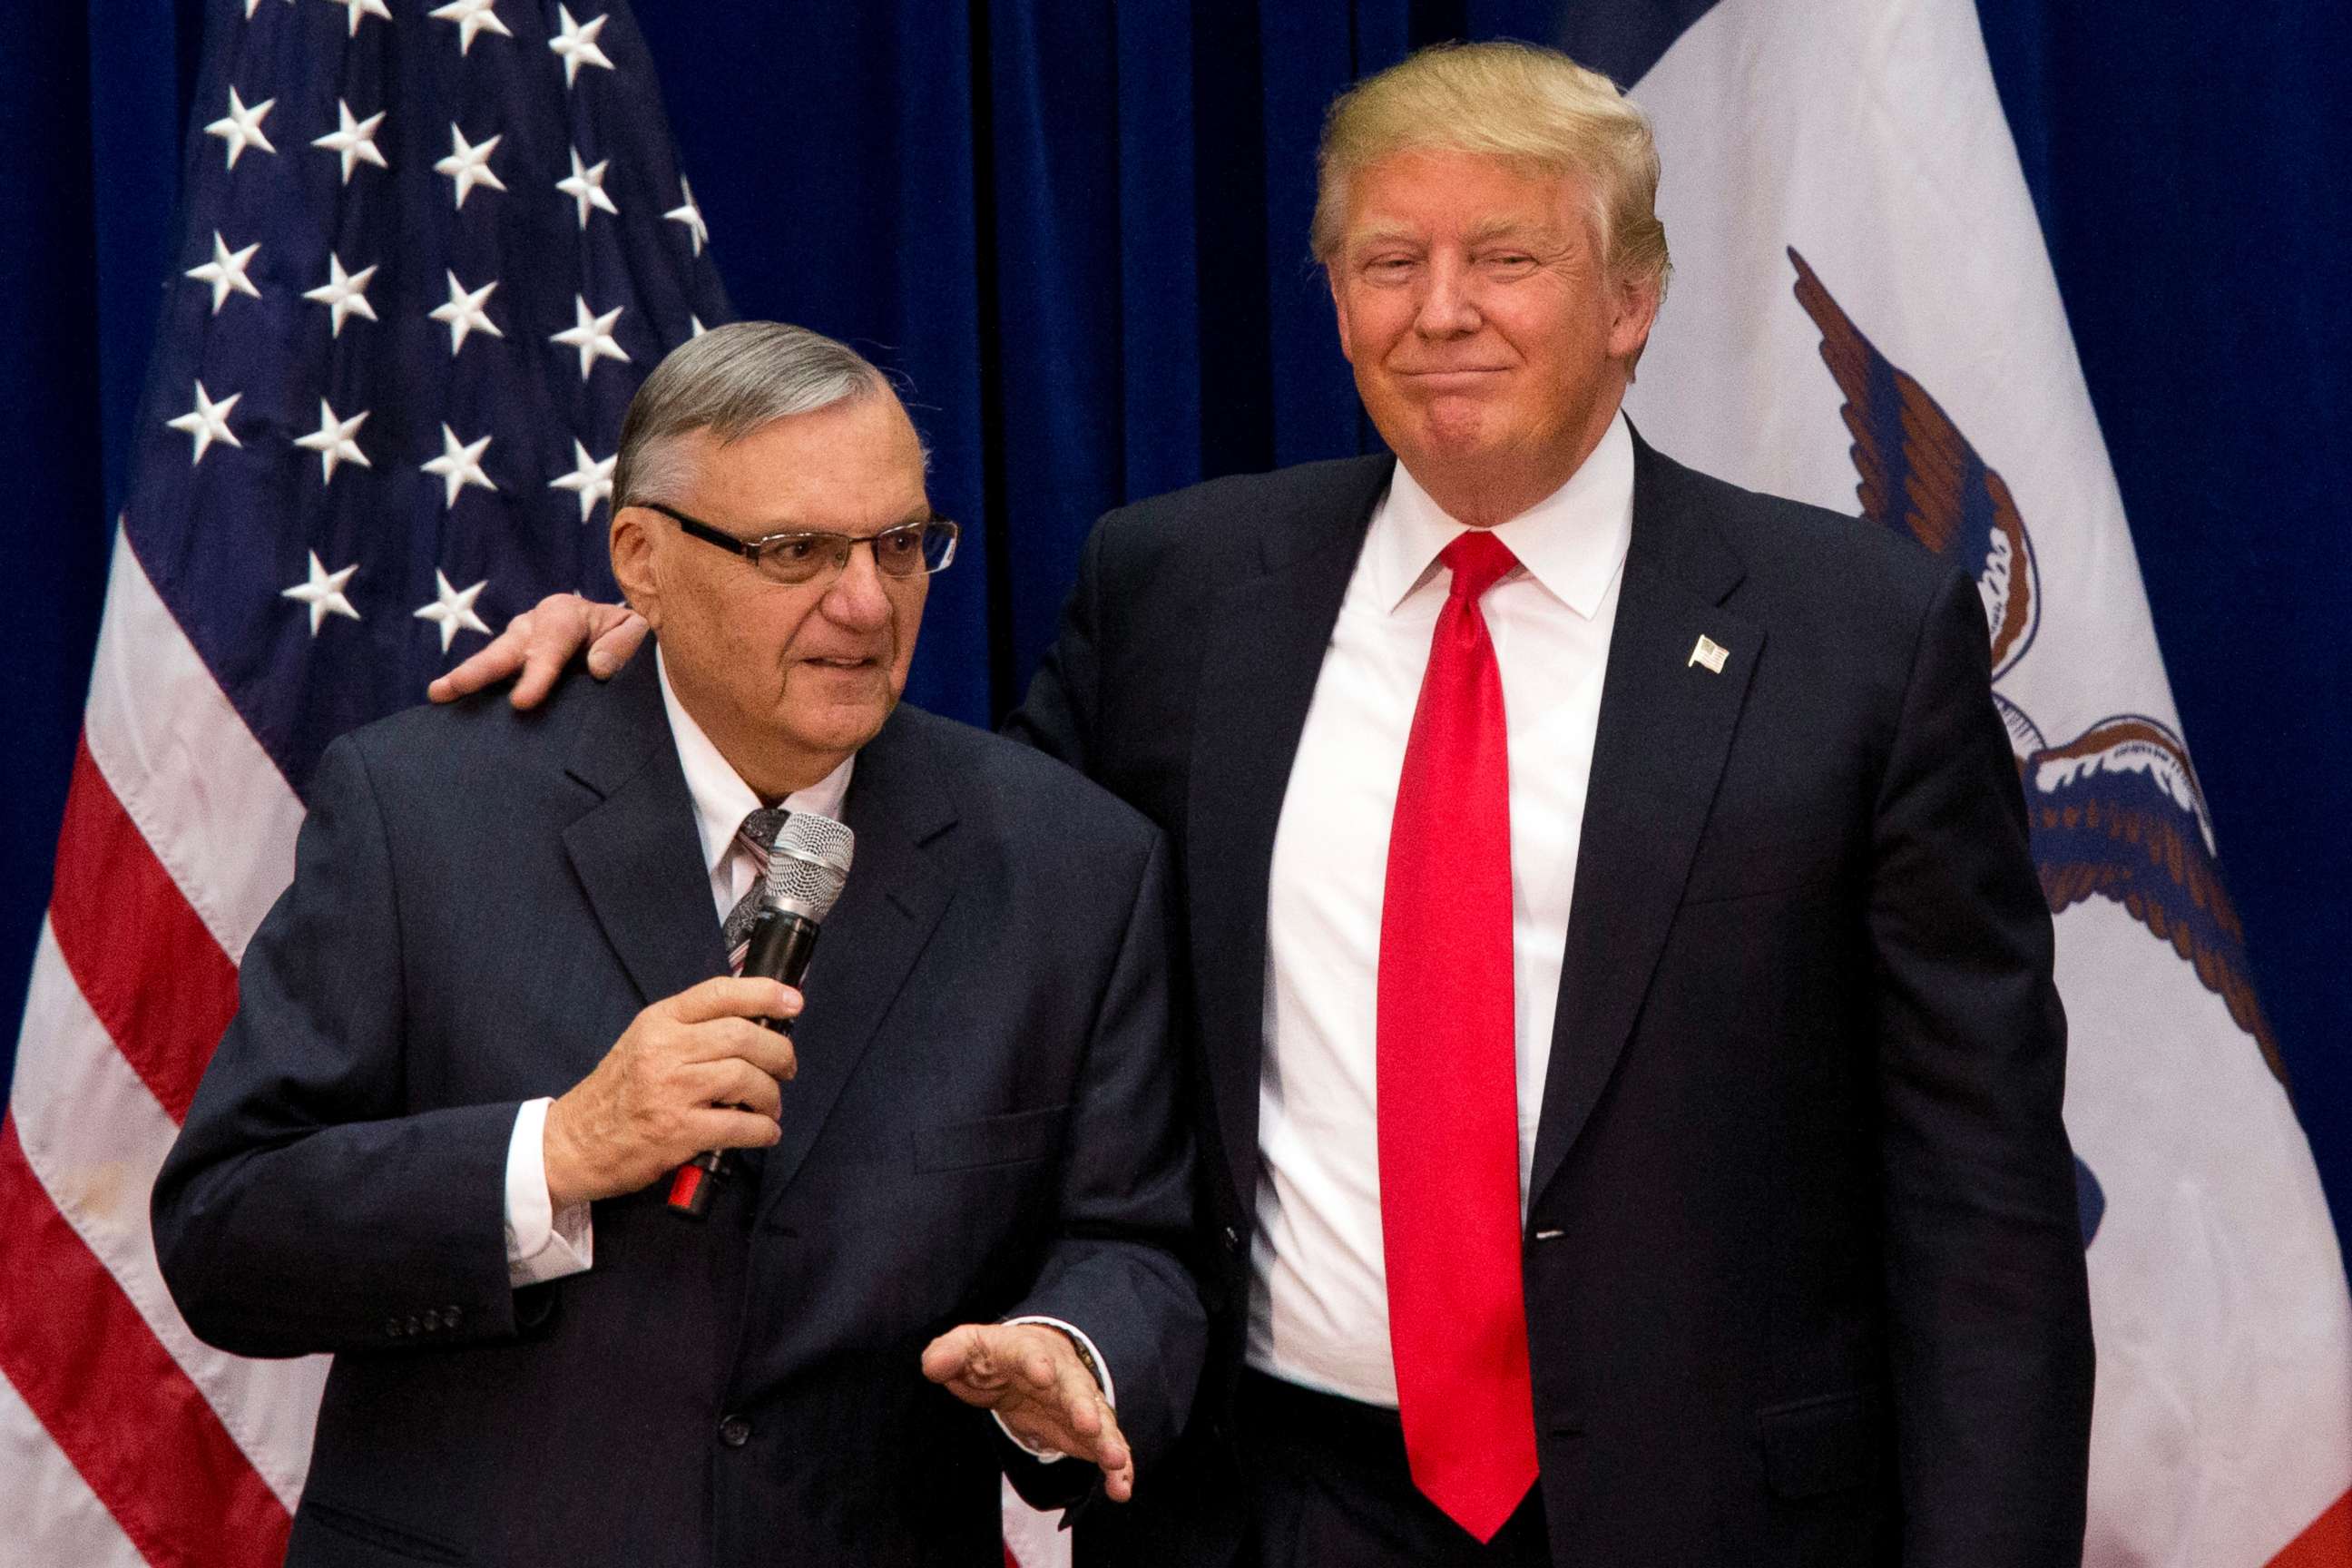 PHOTO: Then Republican presidential candidate Donald Trump is joined by Maricopa County, Ariz., Sheriff Joe Arpaio at a campaign event at the Roundhouse Gymnasium in Marshalltown, Iowa, Jan. 26, 2016.